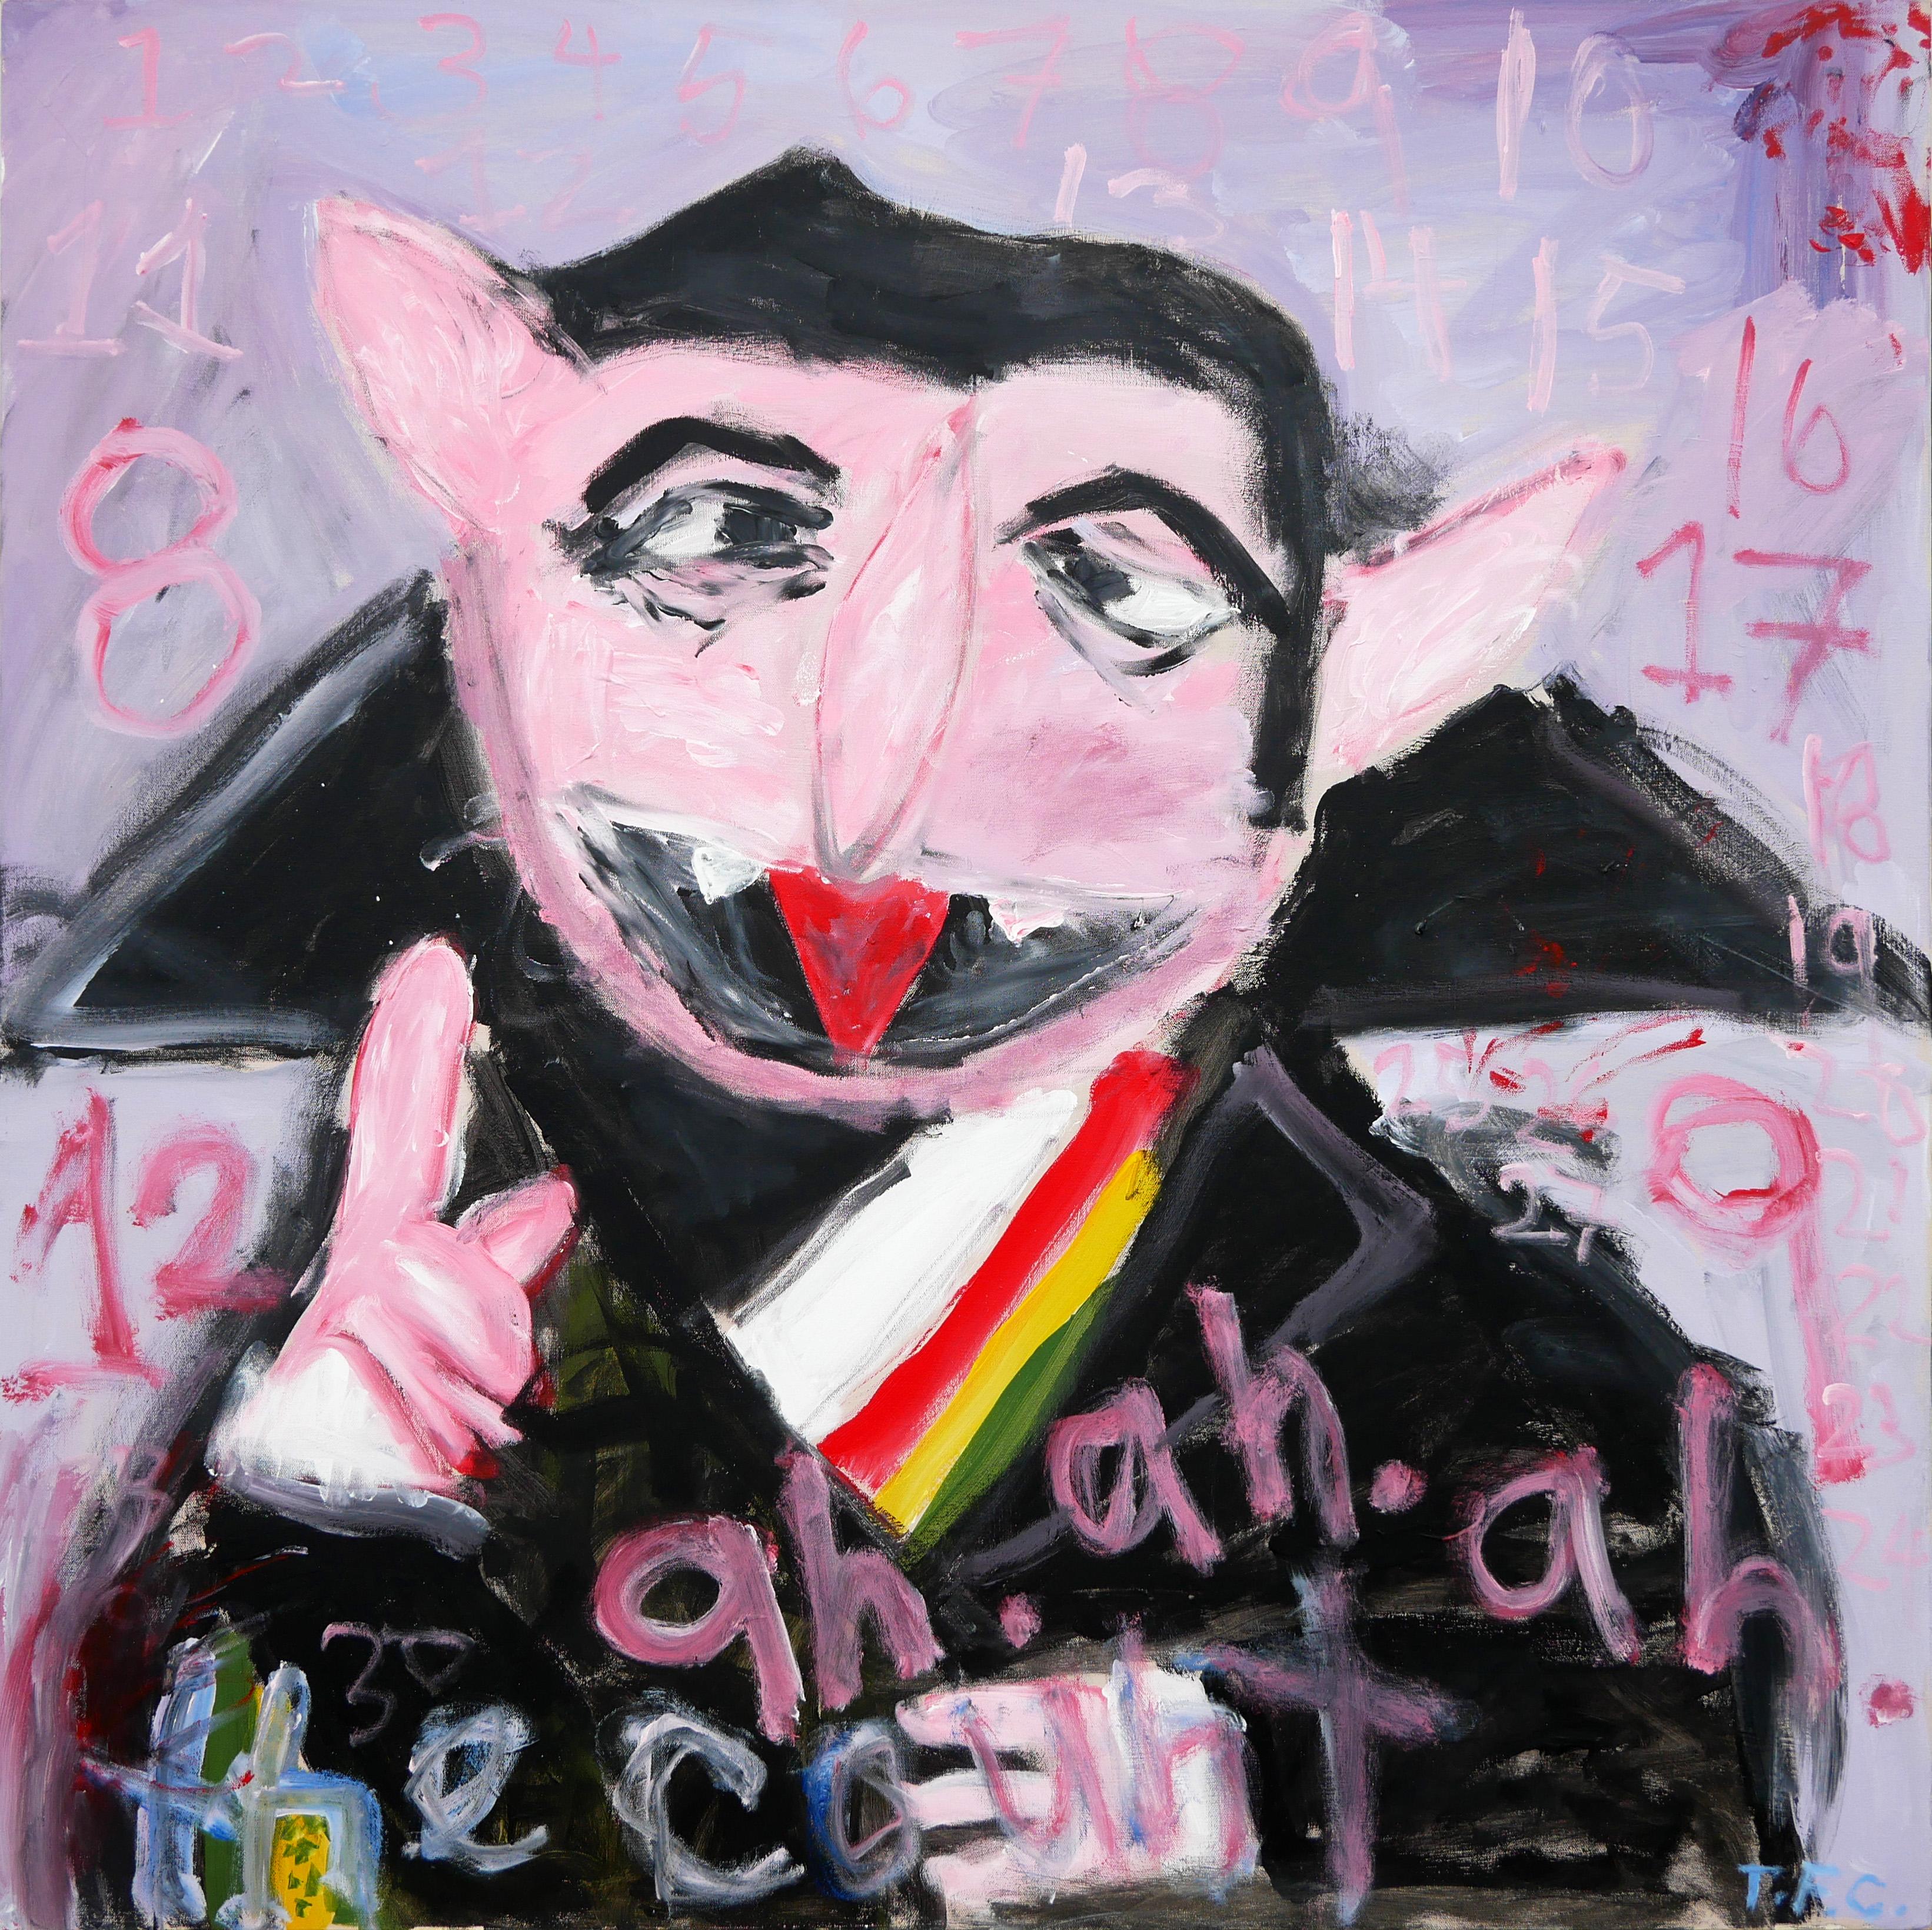 Tyler Casey Figurative Painting - "The Count" Contemporary Abstract Pop Art Painting of Sesame Street Character 